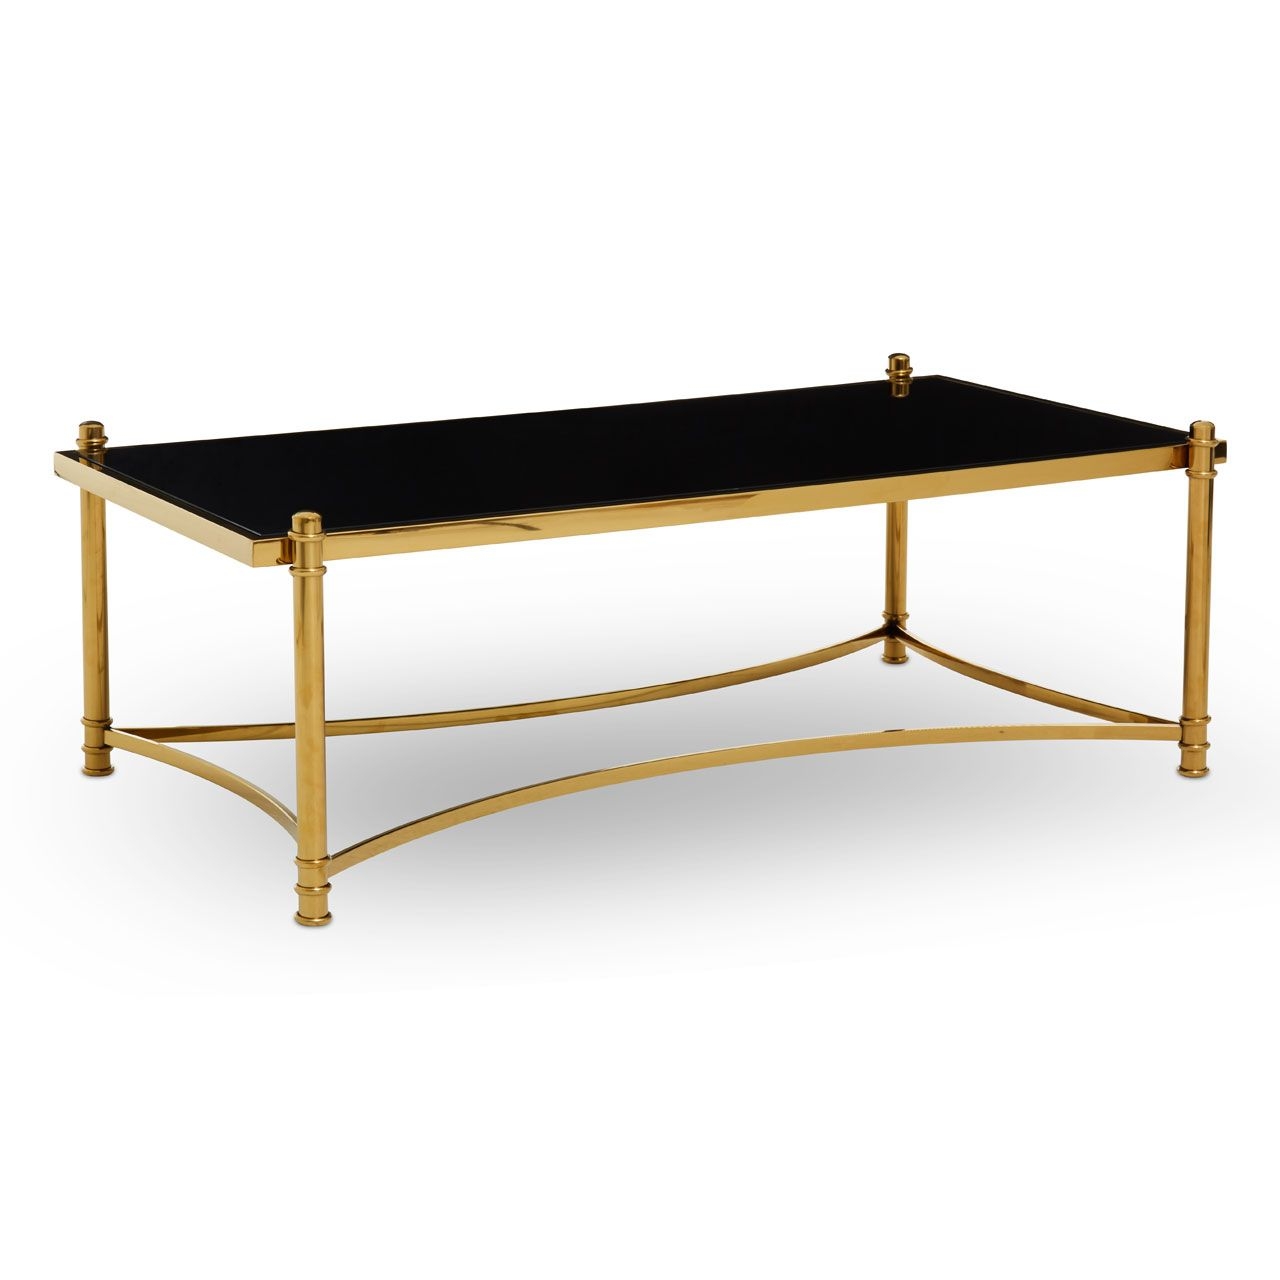 Ackley Glass Top Coffee Table In Black With Gold Metal Frame